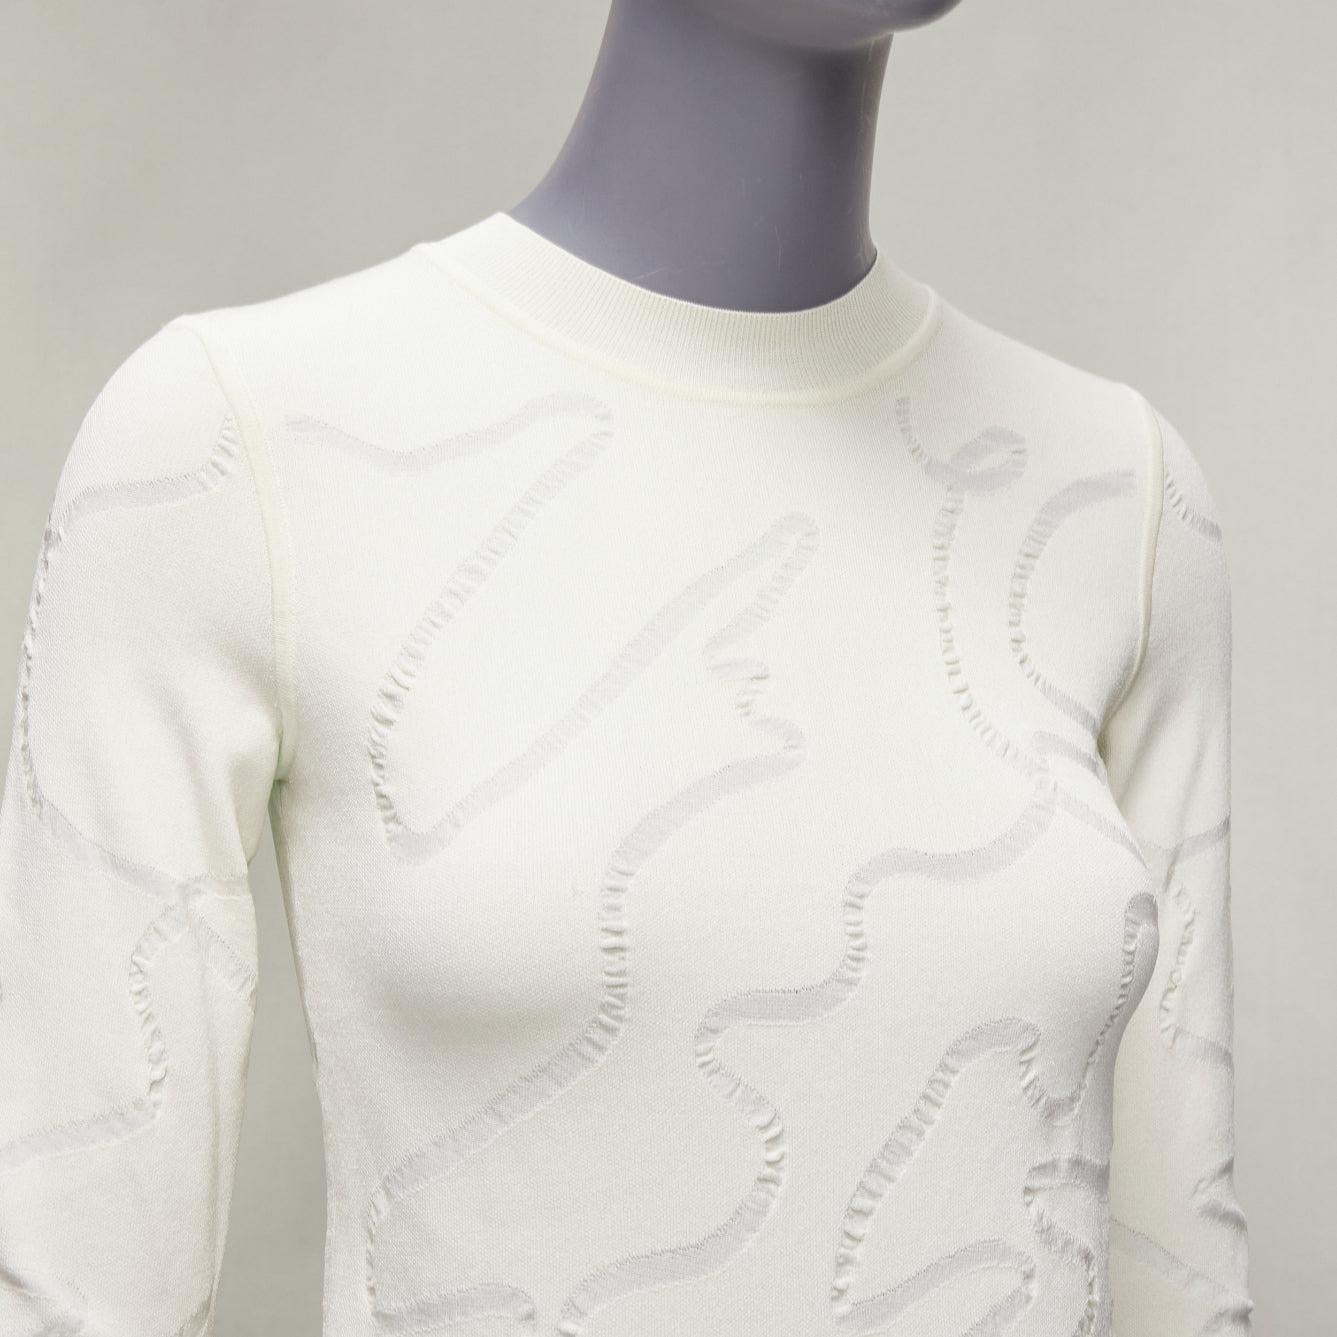 HELMUT LANG cream wiggly line motive jacquard long sleeve sweater S
Reference: CNPG/A00058
Brand: Helmut Lang
Designer: Helmut Lang
Material: Viscose, Blend
Color: Cream
Pattern: Geometric
Closure: Pullover
Made in: China

CONDITION:
Condition: Very